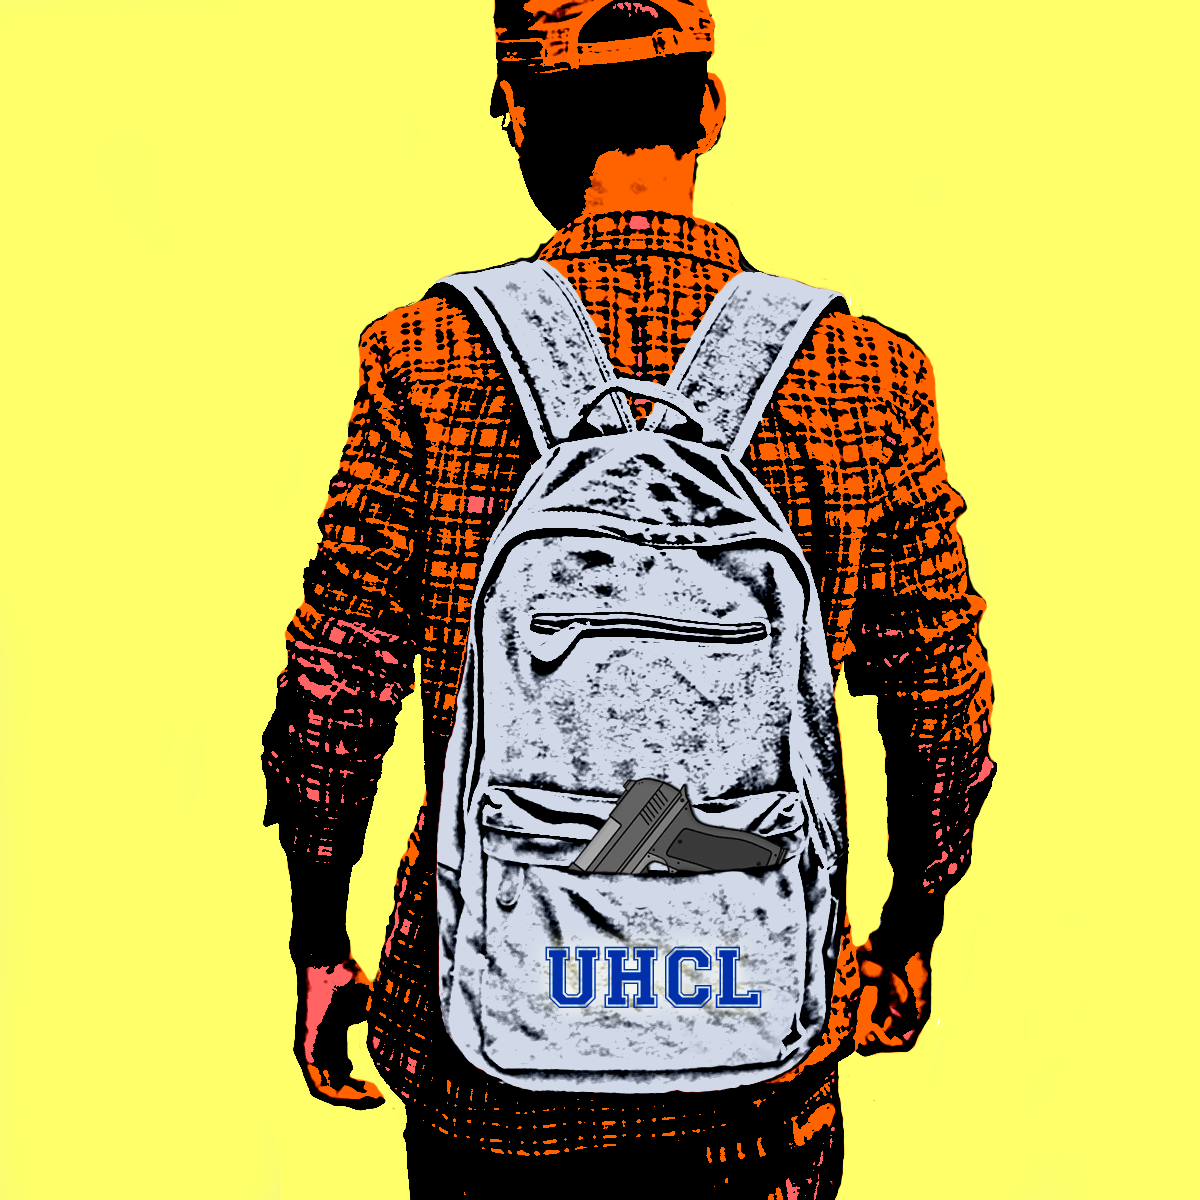 Graphic: A student carries a handgun in his backpack. Illustration by The Signal reporter Sarah Wylie.